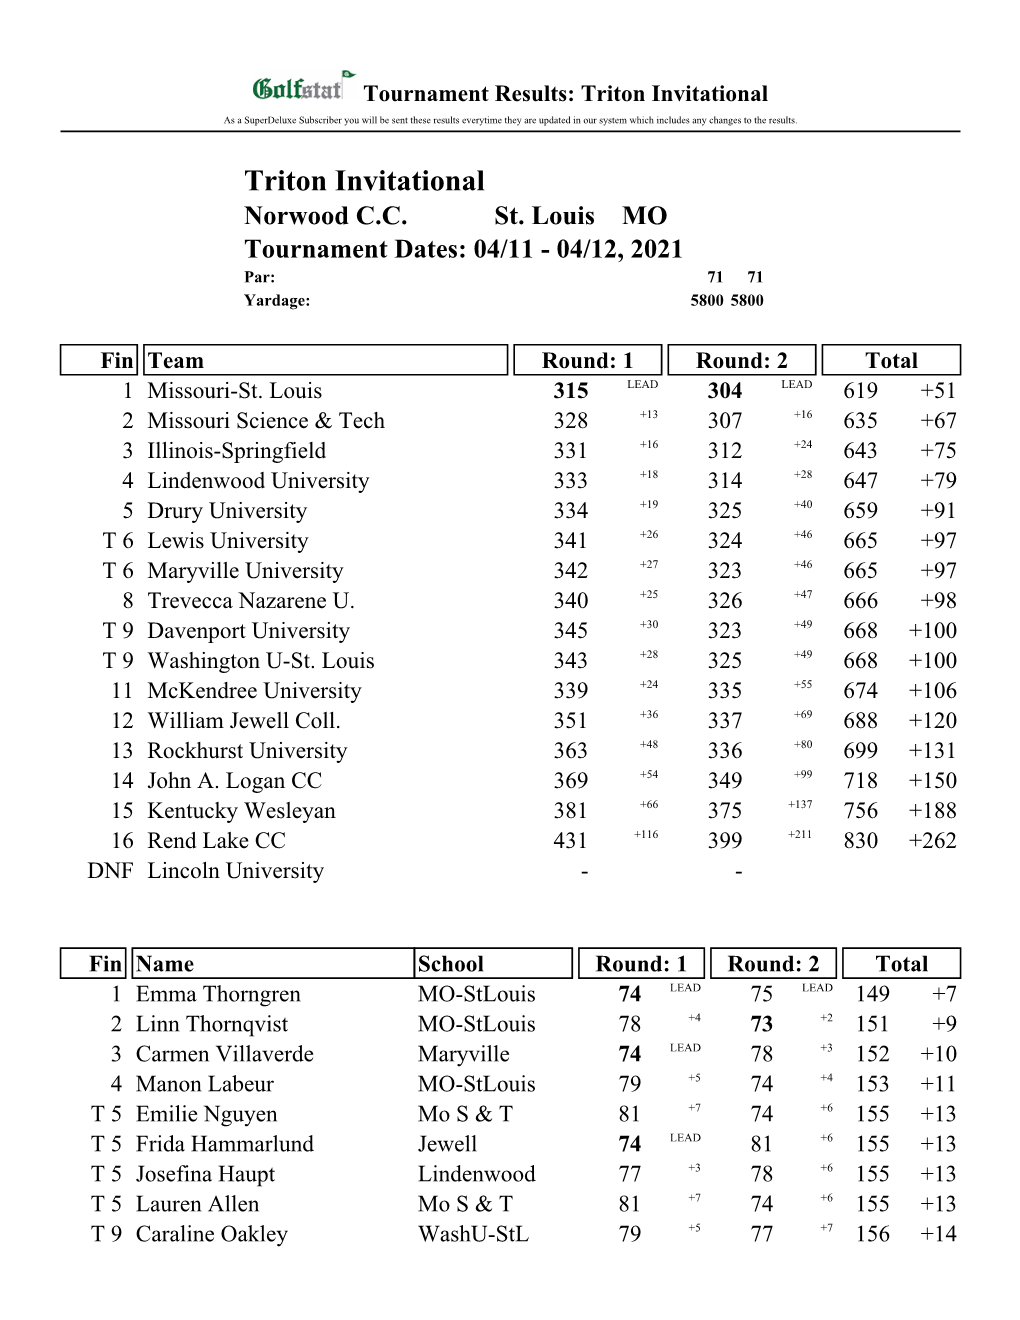 Triton Invitational As a Superdeluxe Subscriber You Will Be Sent These Results Everytime They Are Updated in Our System Which Includes Any Changes to the Results